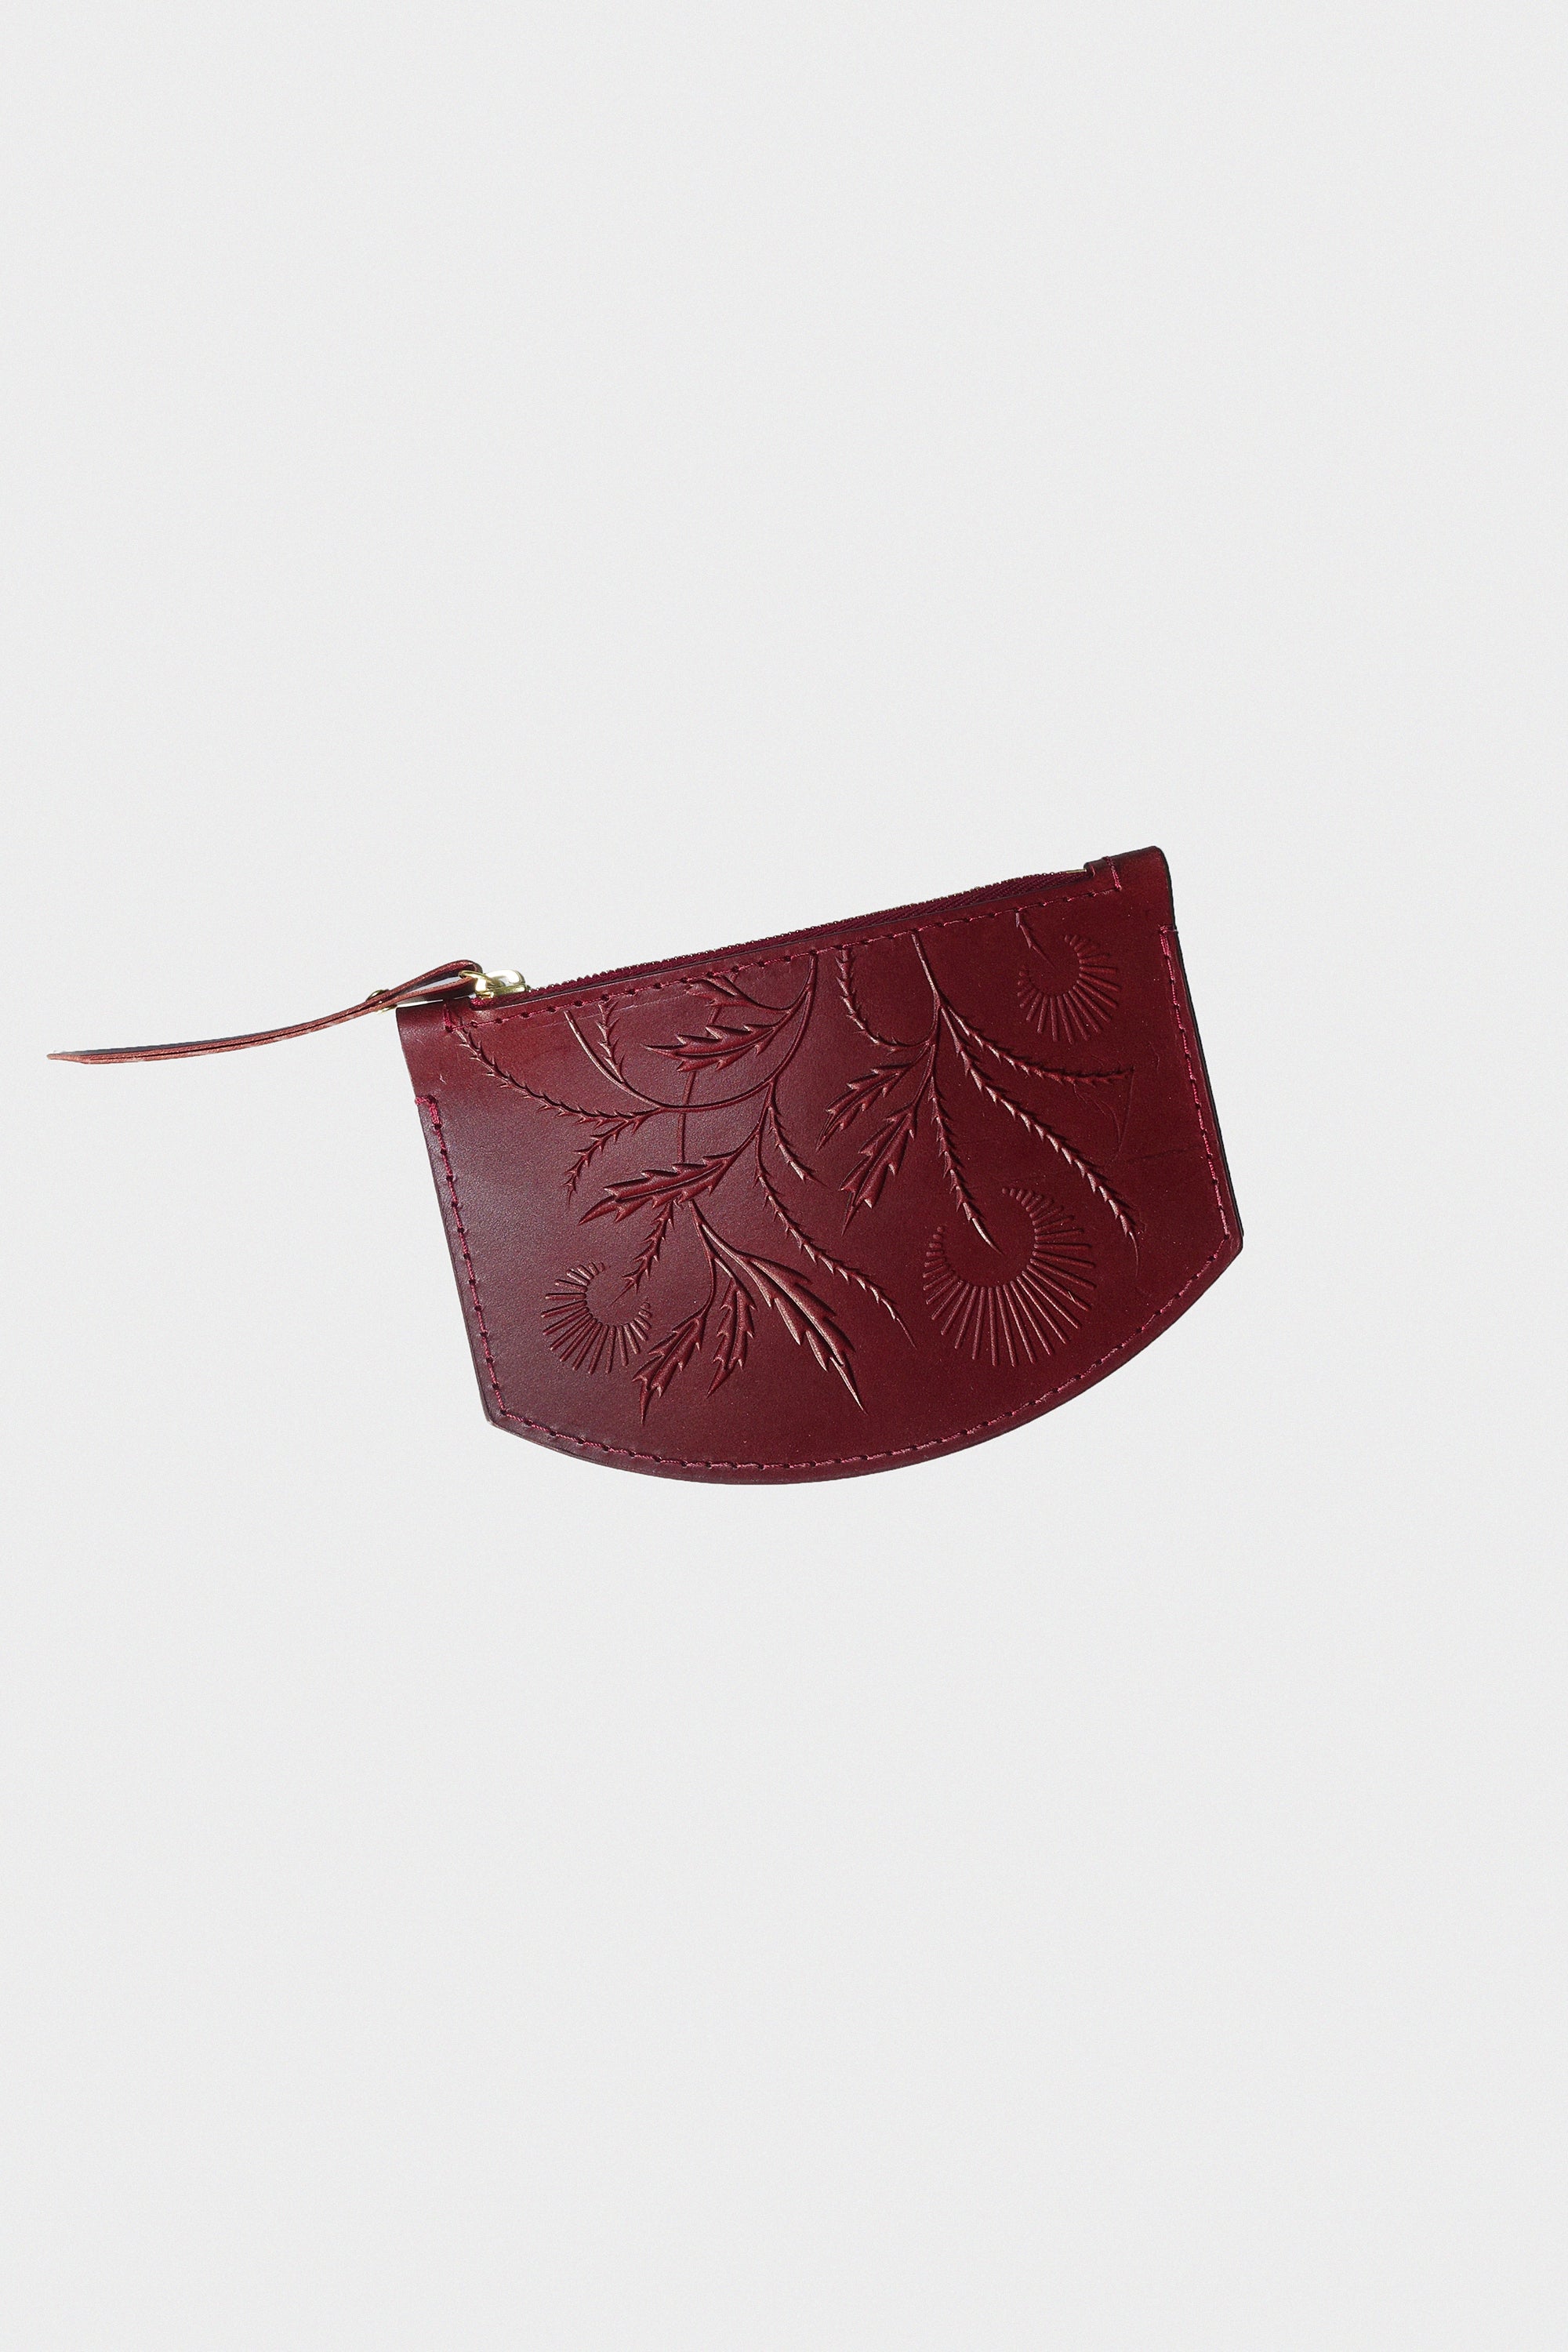 Cosmic Thistle Coin Pouch in Oxblood